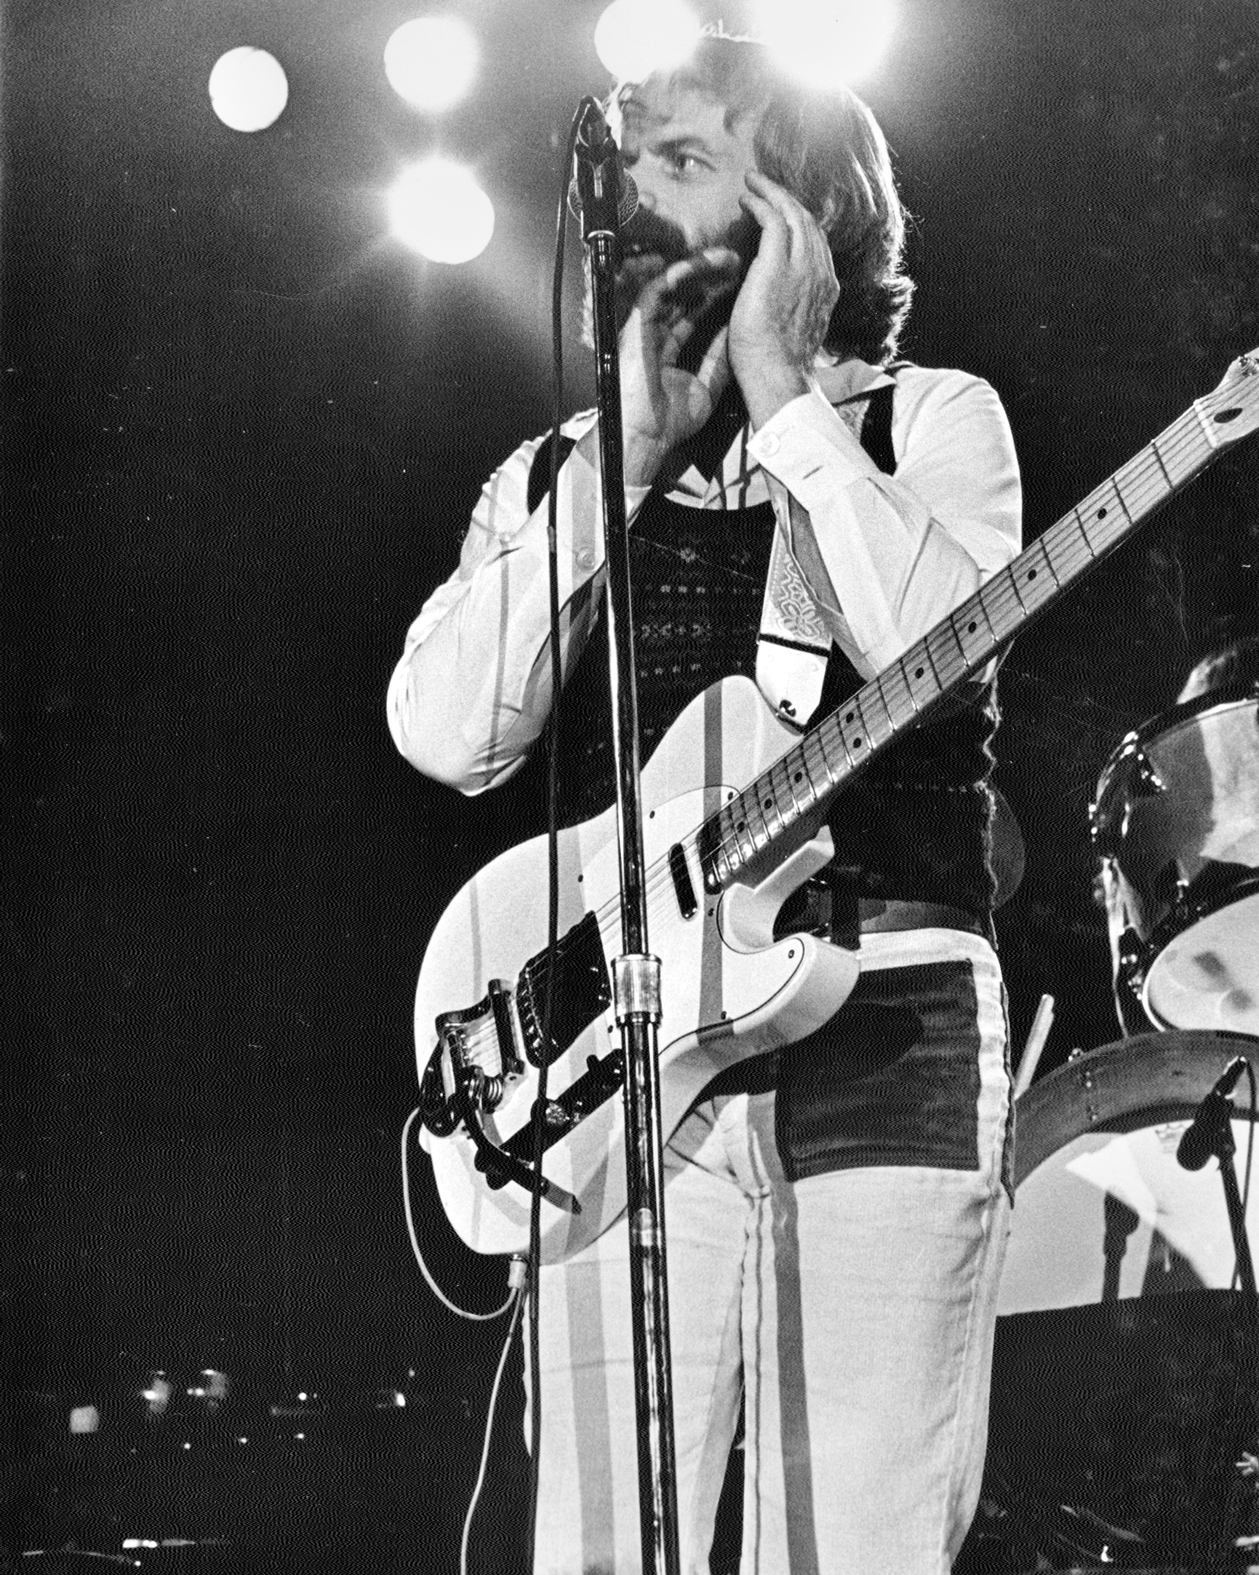 Kenny Loggins (then with Loggins and Messina) at a Barton Hall concert in 1973